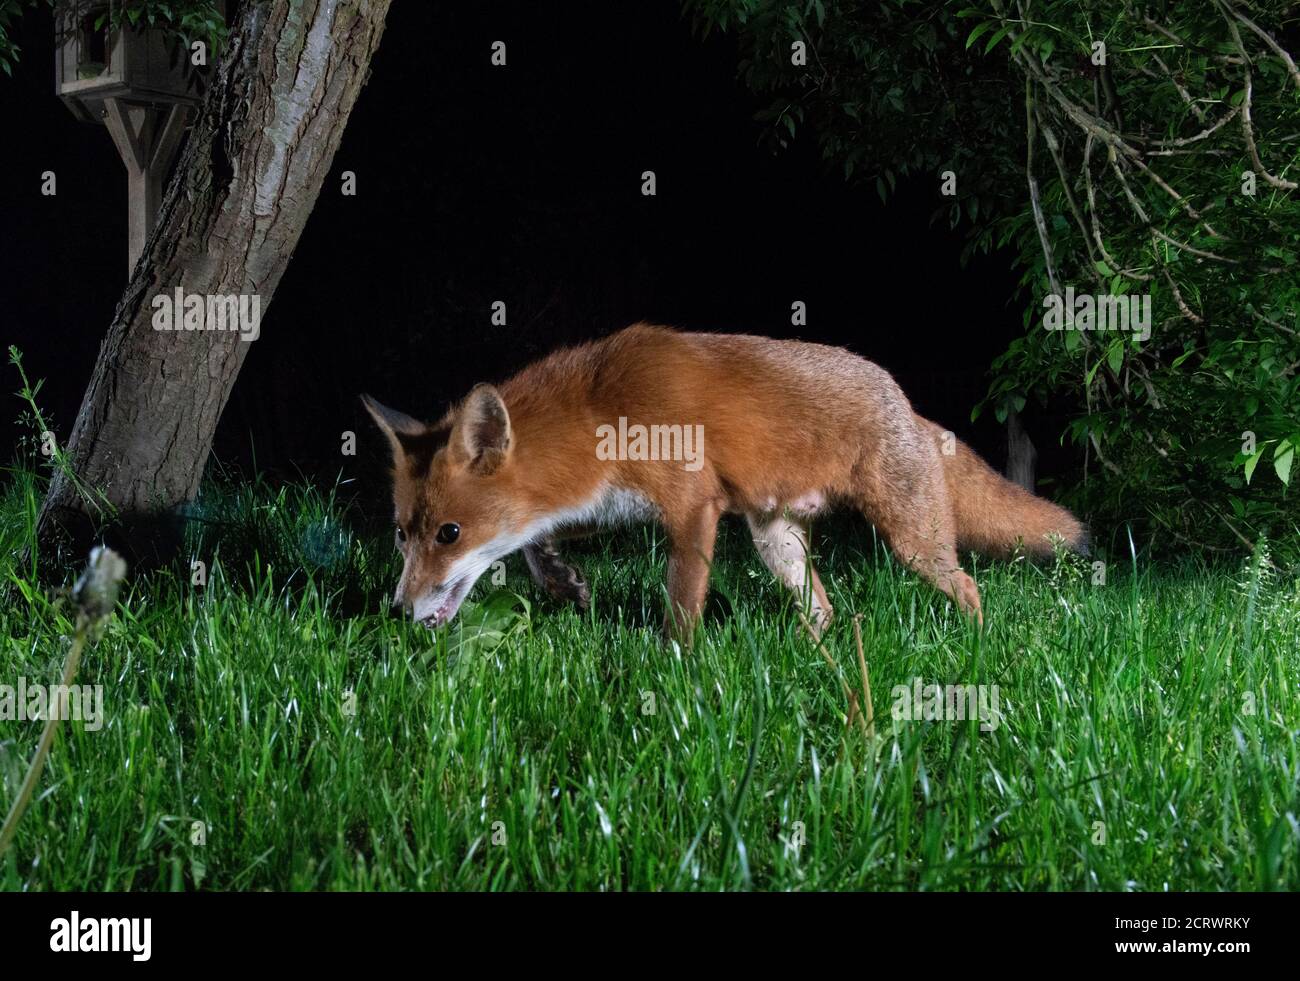 Fox at night, vixen in search of food walking to the left sniffing the grass Stock Photo